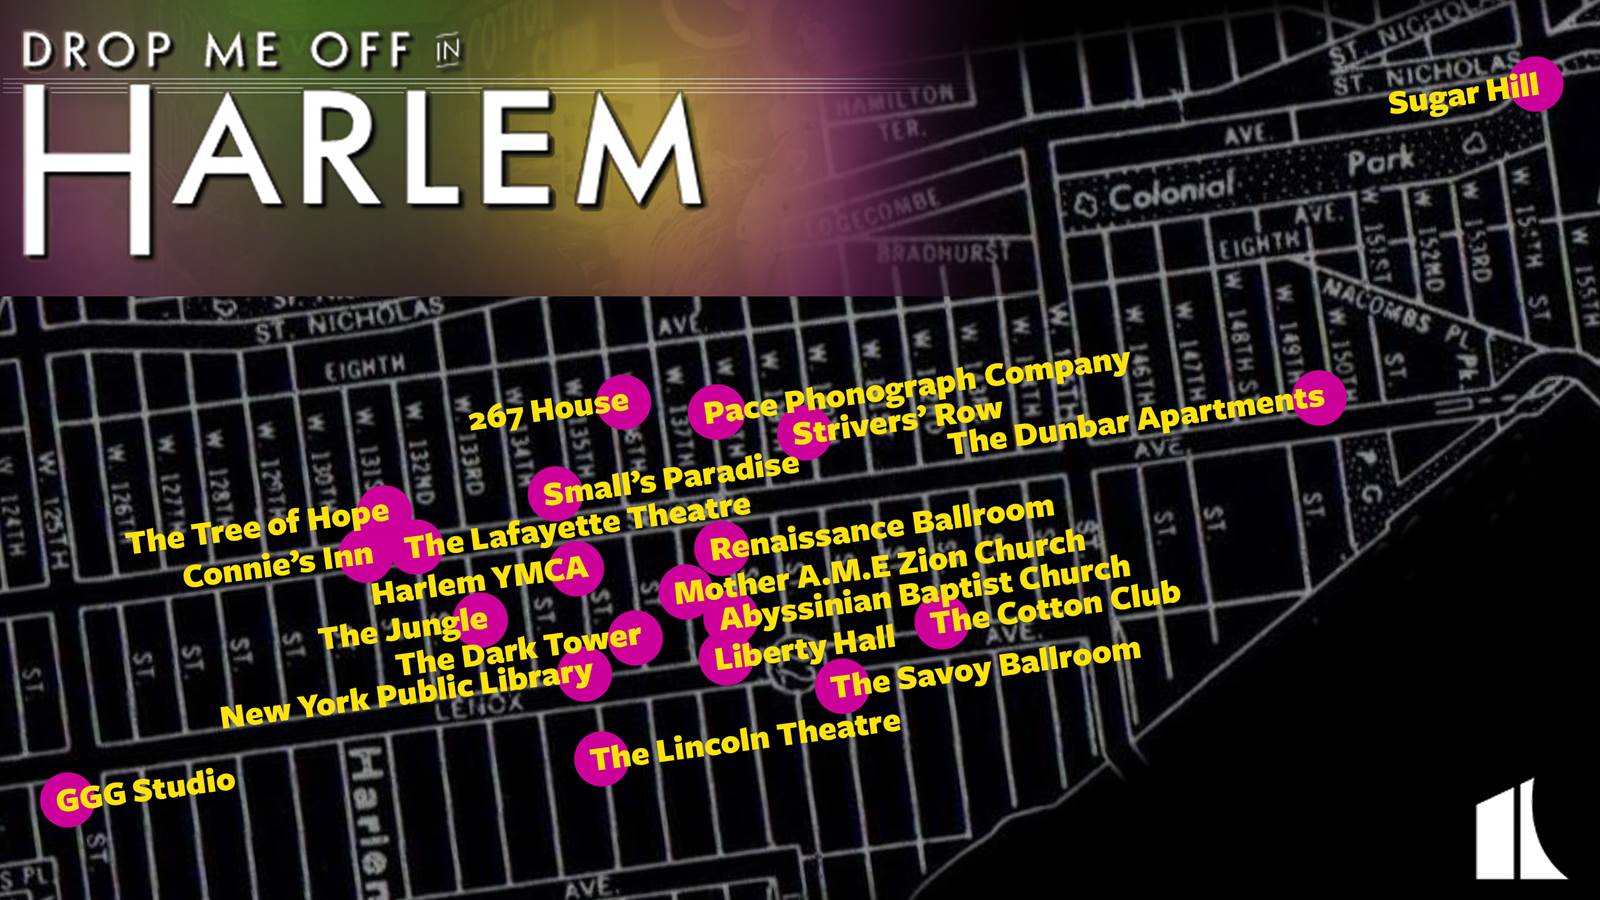 The Drop Me Off in Harlem logo in pink, green, and yellow rests in the top left corner of an image of a Harlem map. The map is in black with the street names and lines marked in white. The names of important Harlem Renaissance venues are indicated in bolded yellow font with bright pink dots indicating where these places were on the map. 